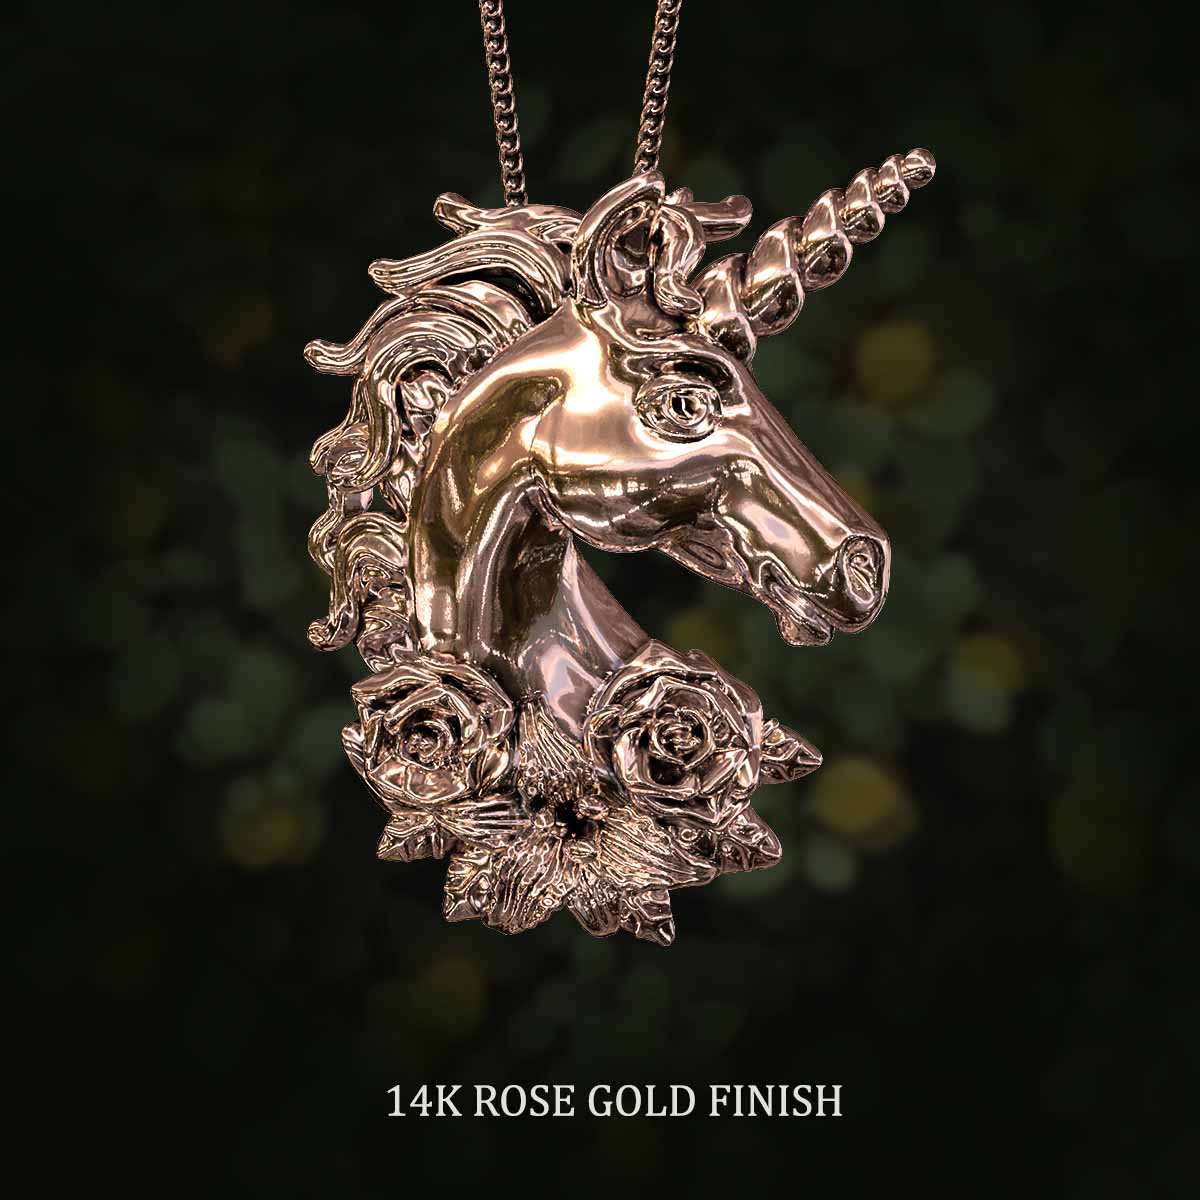     14k-Rose-Gold-Finish-Unicorn-With-Flowers-Pendant-Jewelry-For-Necklace